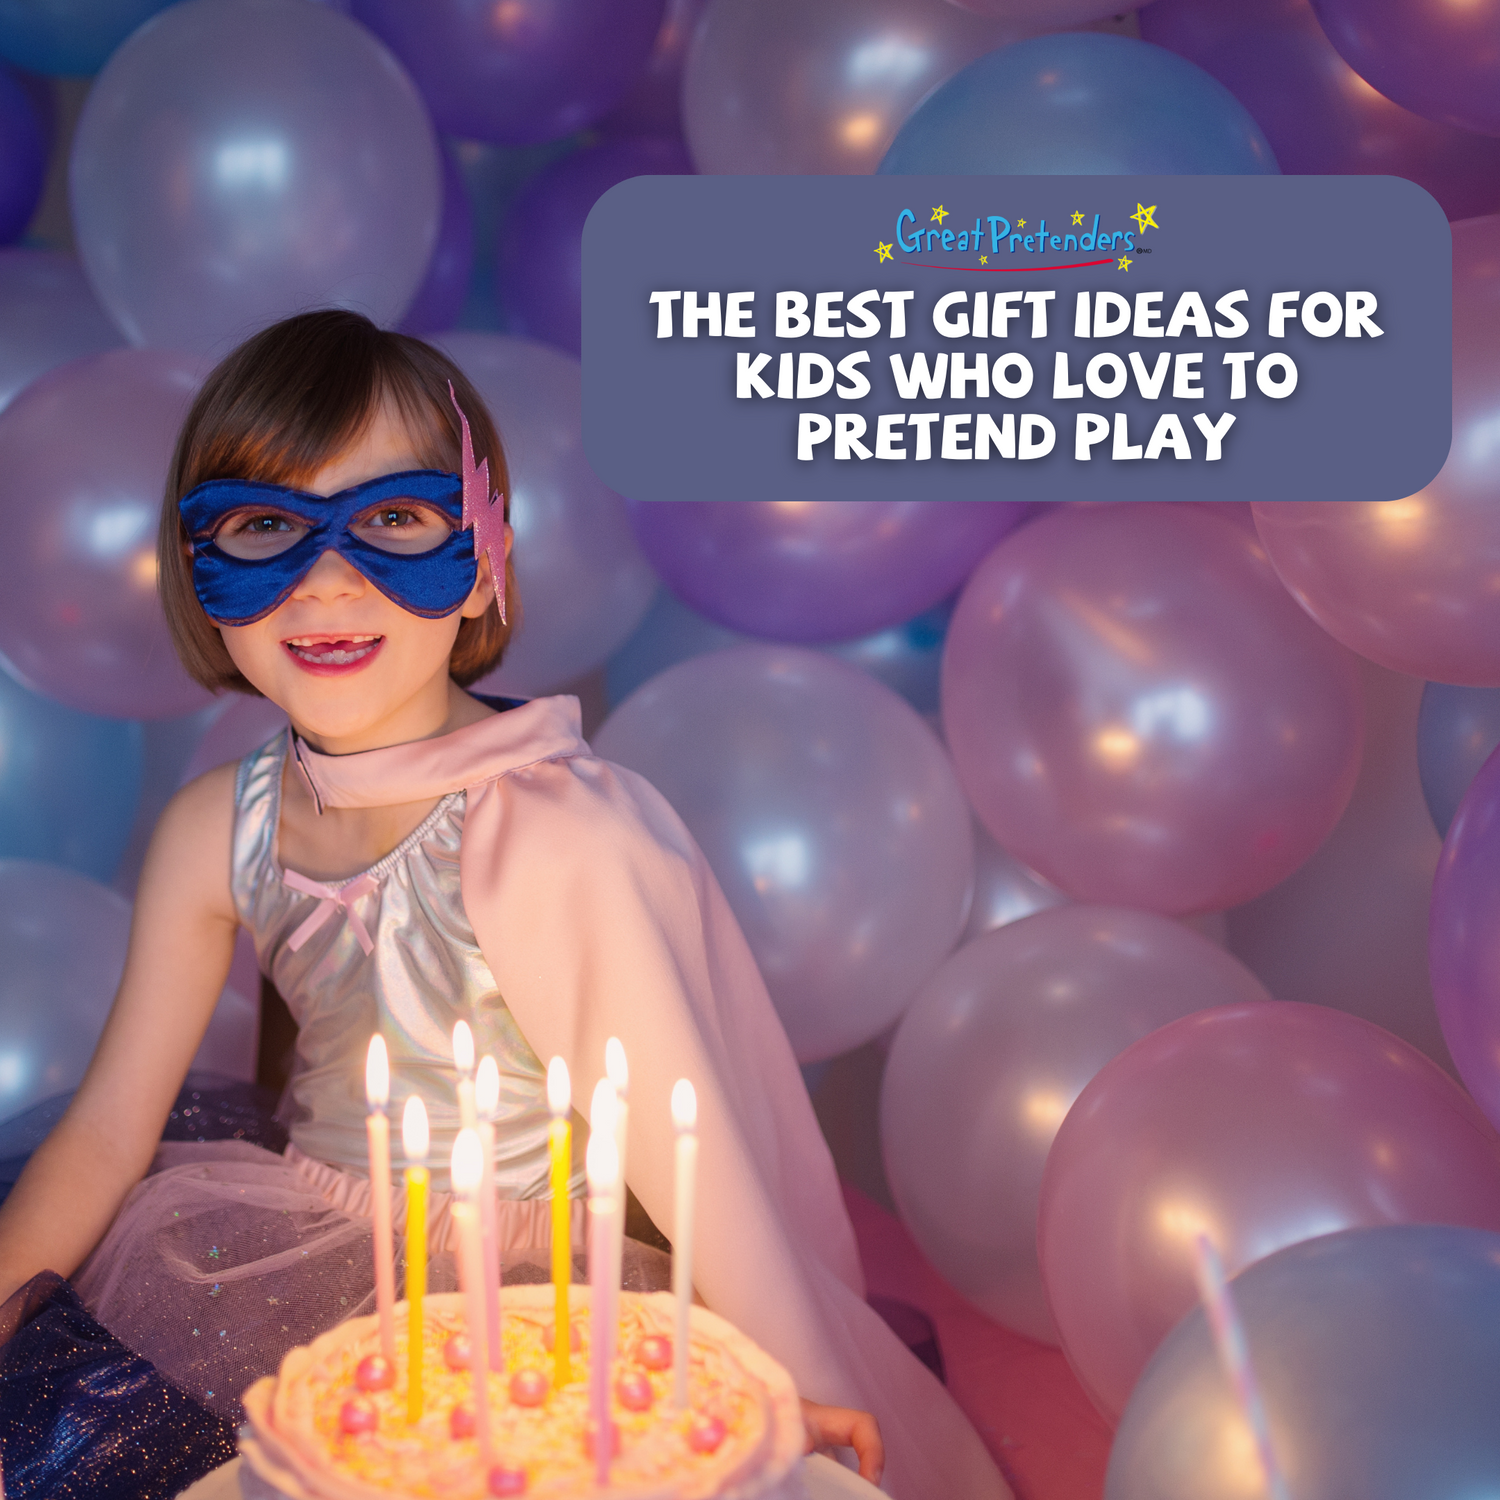 The Best Gift Ideas for Kids Who Love to Pretend Play